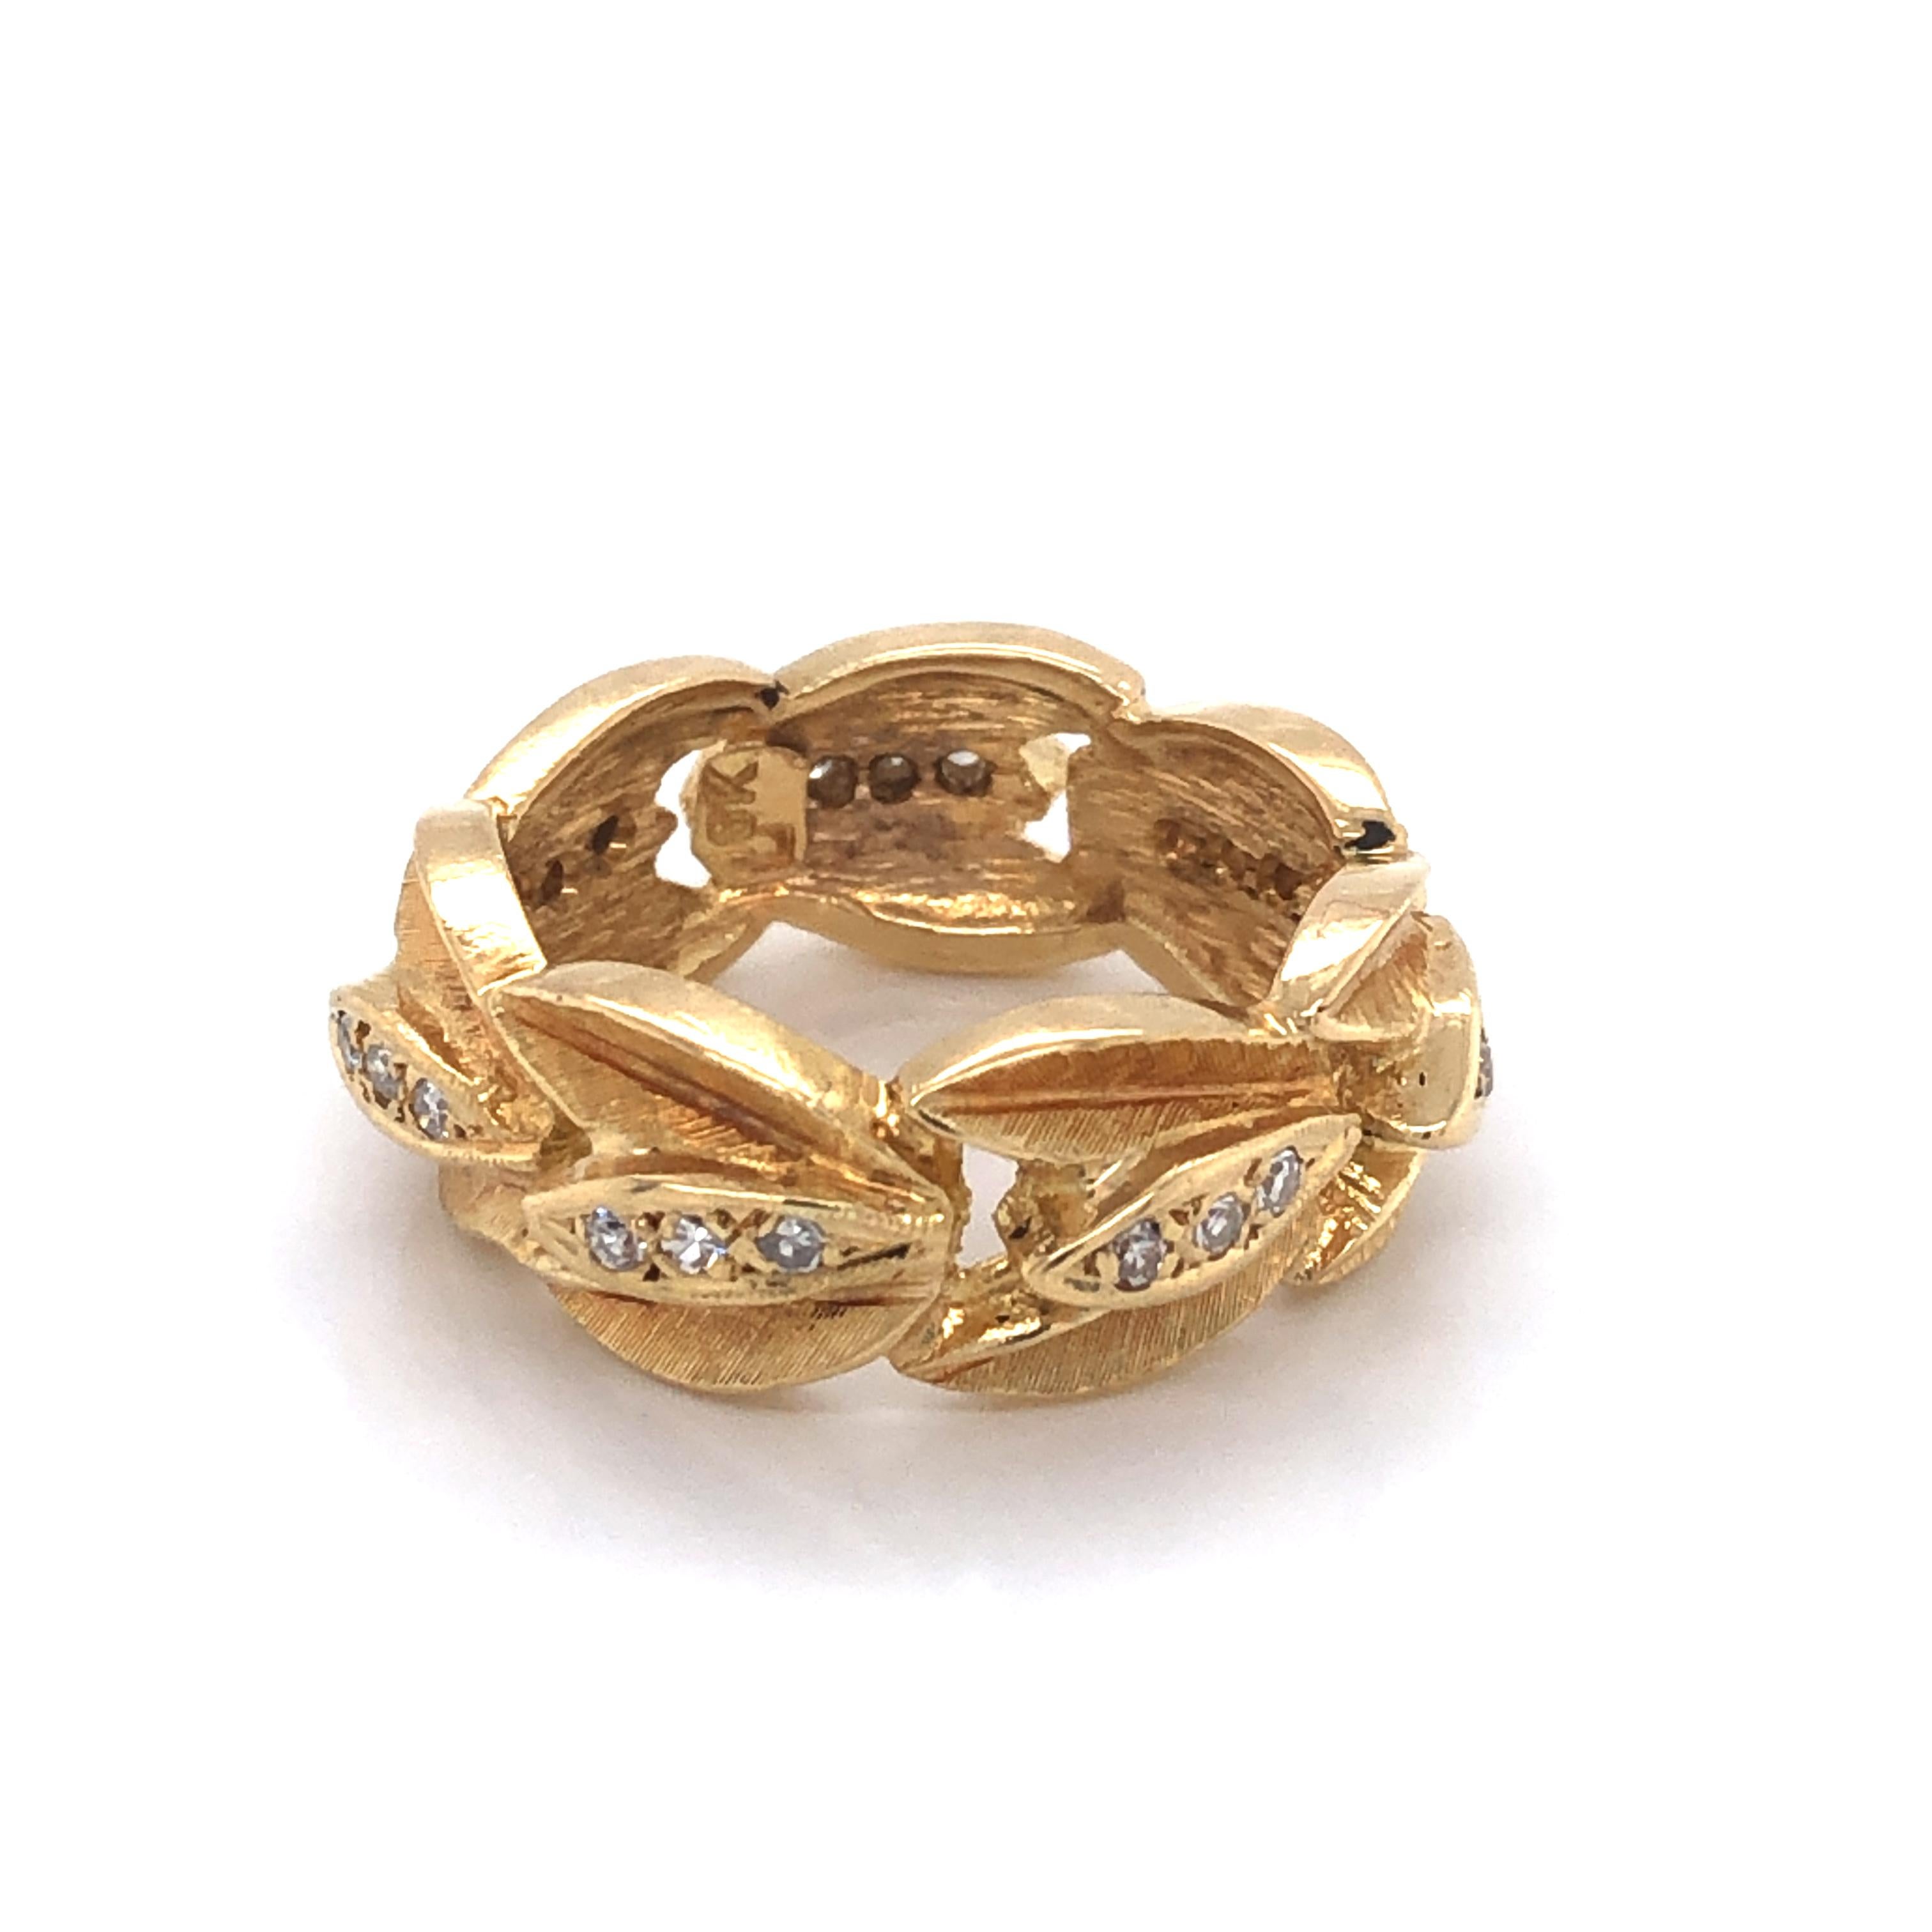 Italian-made in eighteen karat 18K yellow gold are olive leaf inspired branches as symbol of peace and friendship, in a wreath pattern to create this uniquely elegant band style ring. 
The center of each textured gold spray is adorned with petite